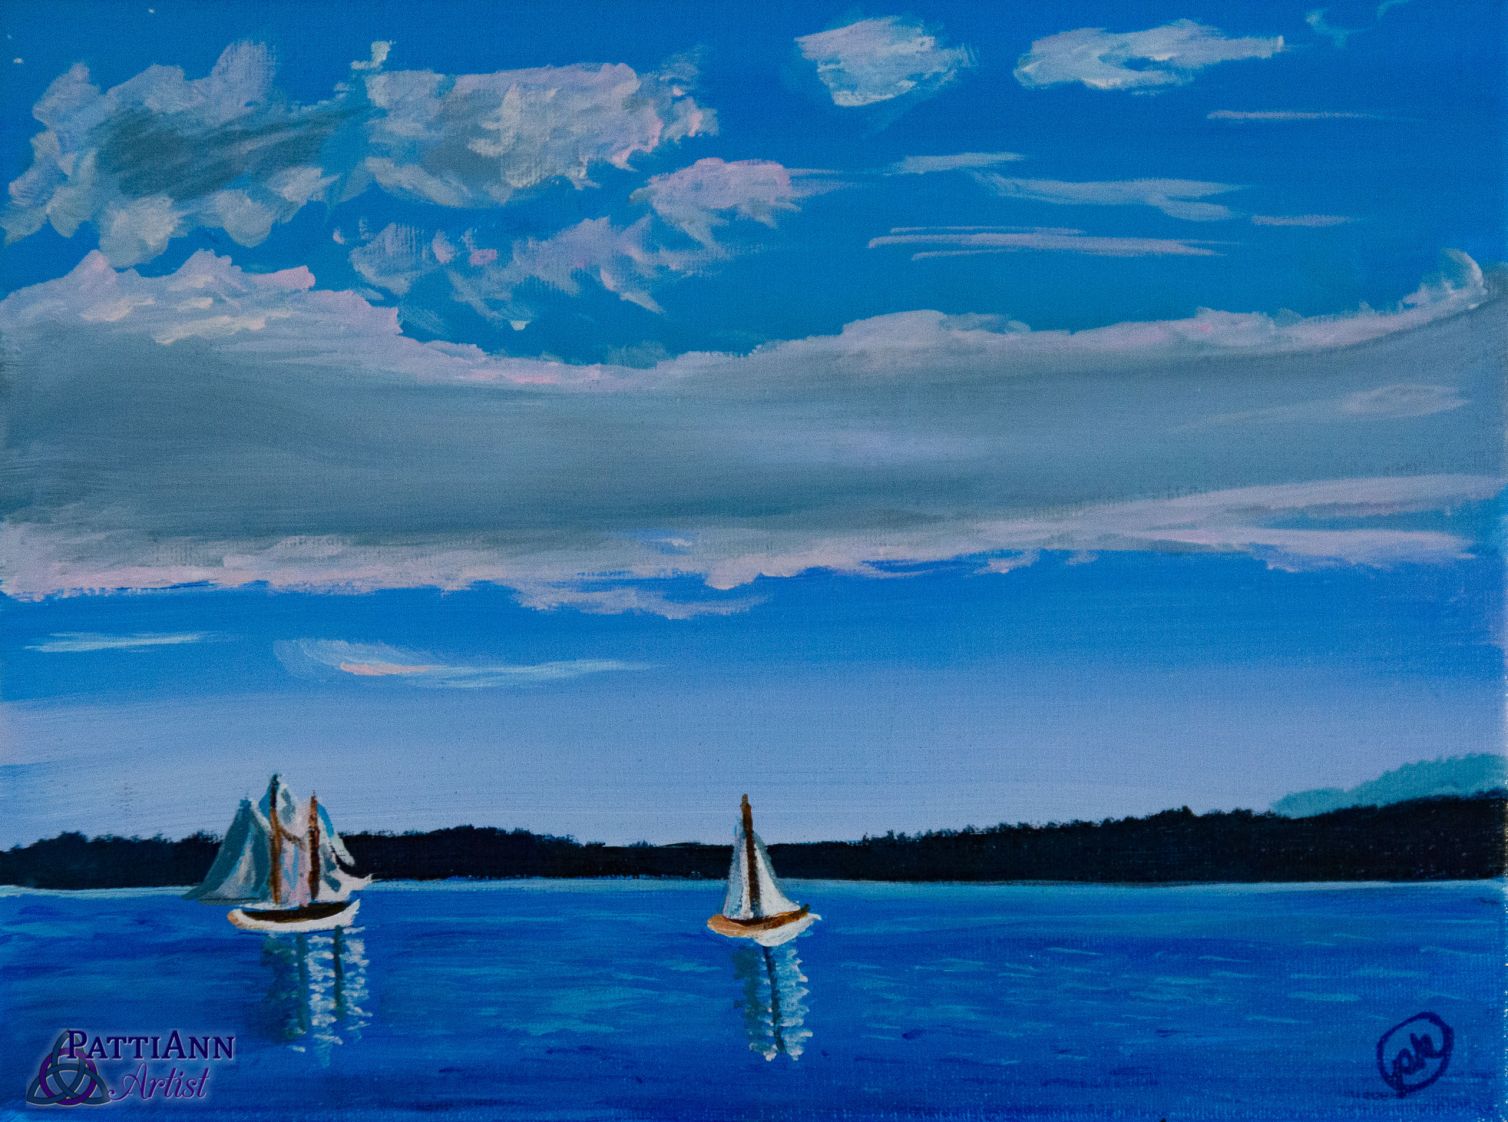 Sailboats on the Sound from photo by Beth Bridgers John